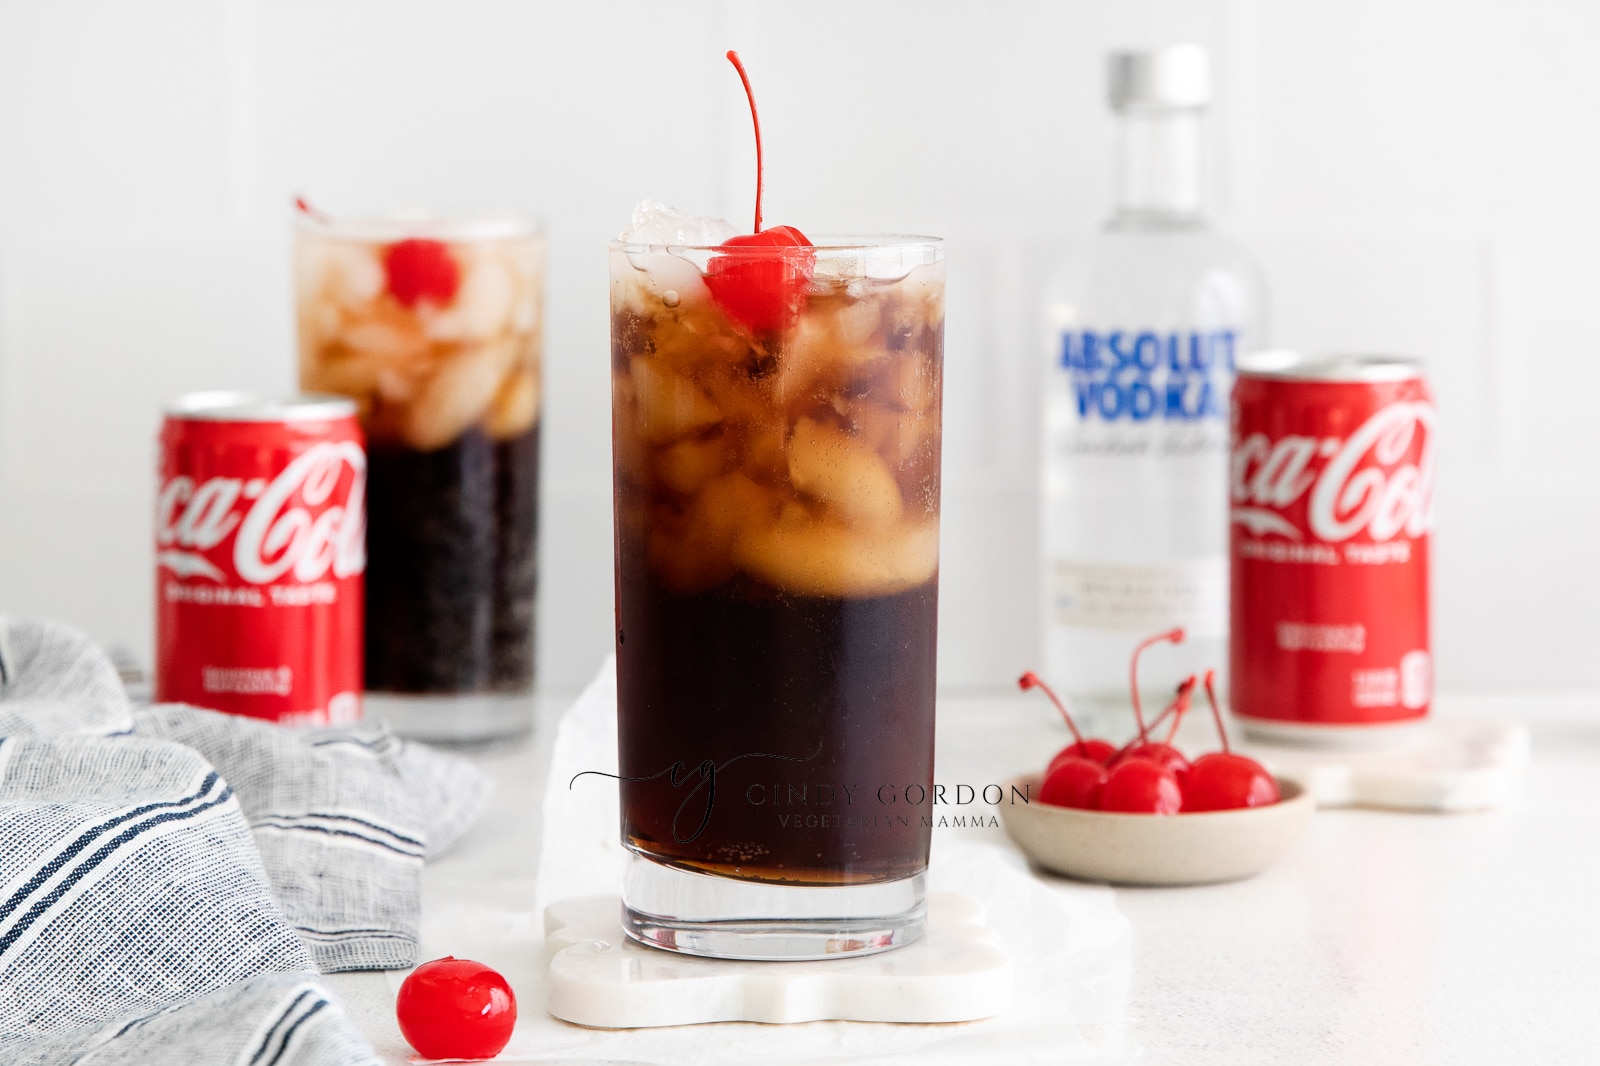 horizontal photo vodka and coke in a tall clear glass with ice and cherries and two straws. Coke can and vodka bottle in back ground. Along with a second vodka coke and a cherry on the table.